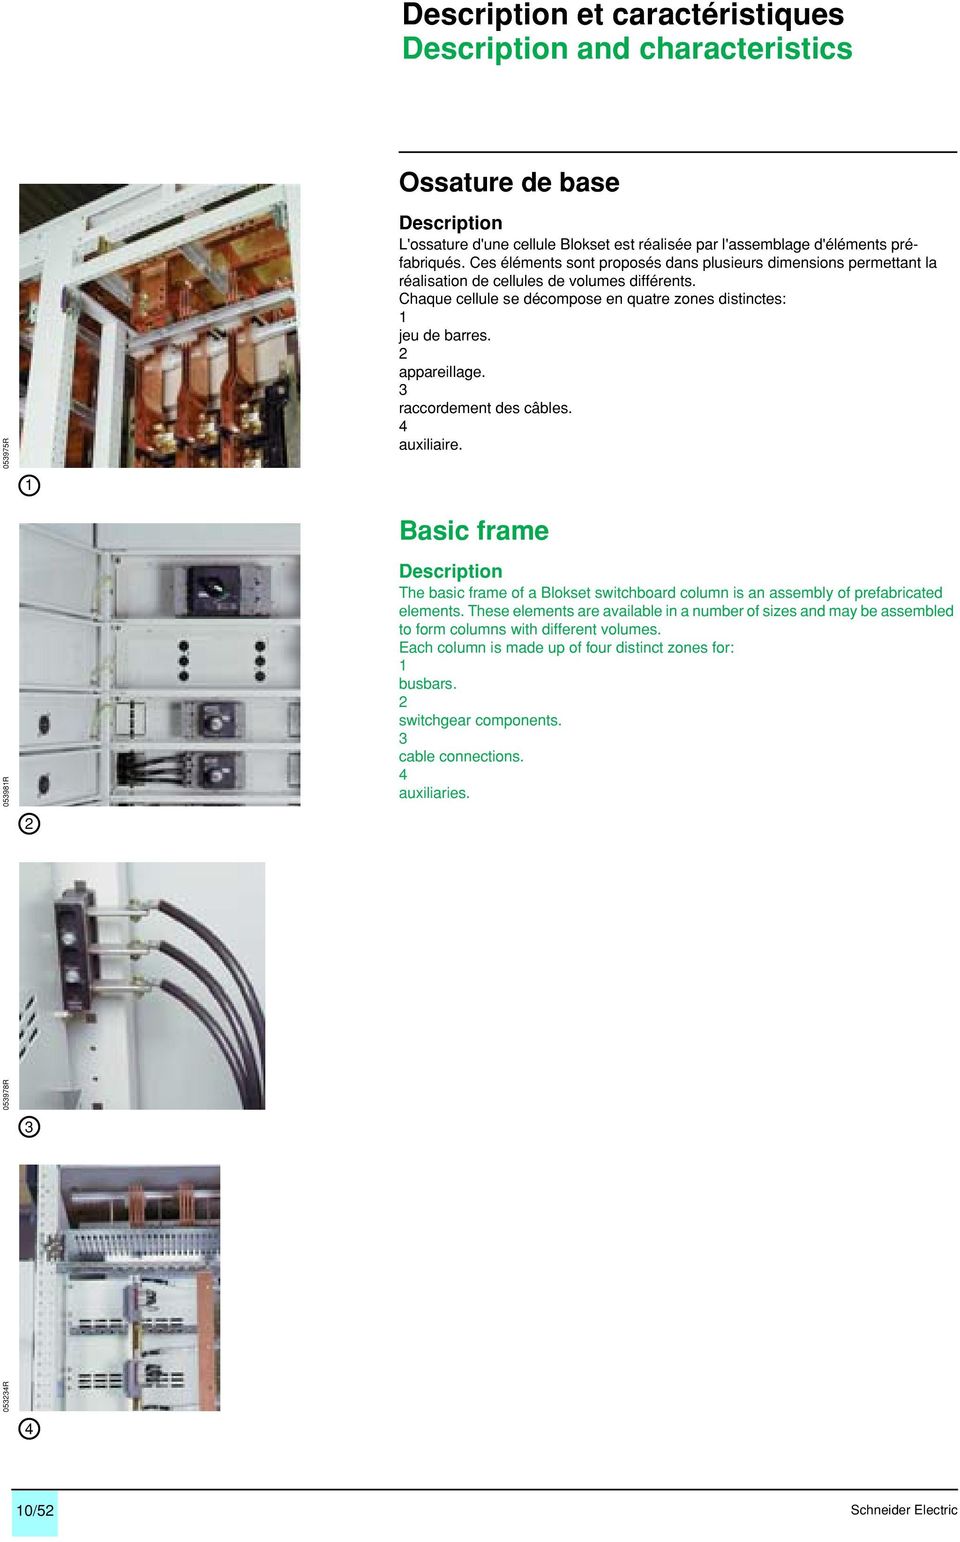 2 appareillage. 3 raccordement des câbles. 4 auxiliaire. Basic frame Description The basic frame of a Blokset switchboard column is an assembly of prefabricated elements.